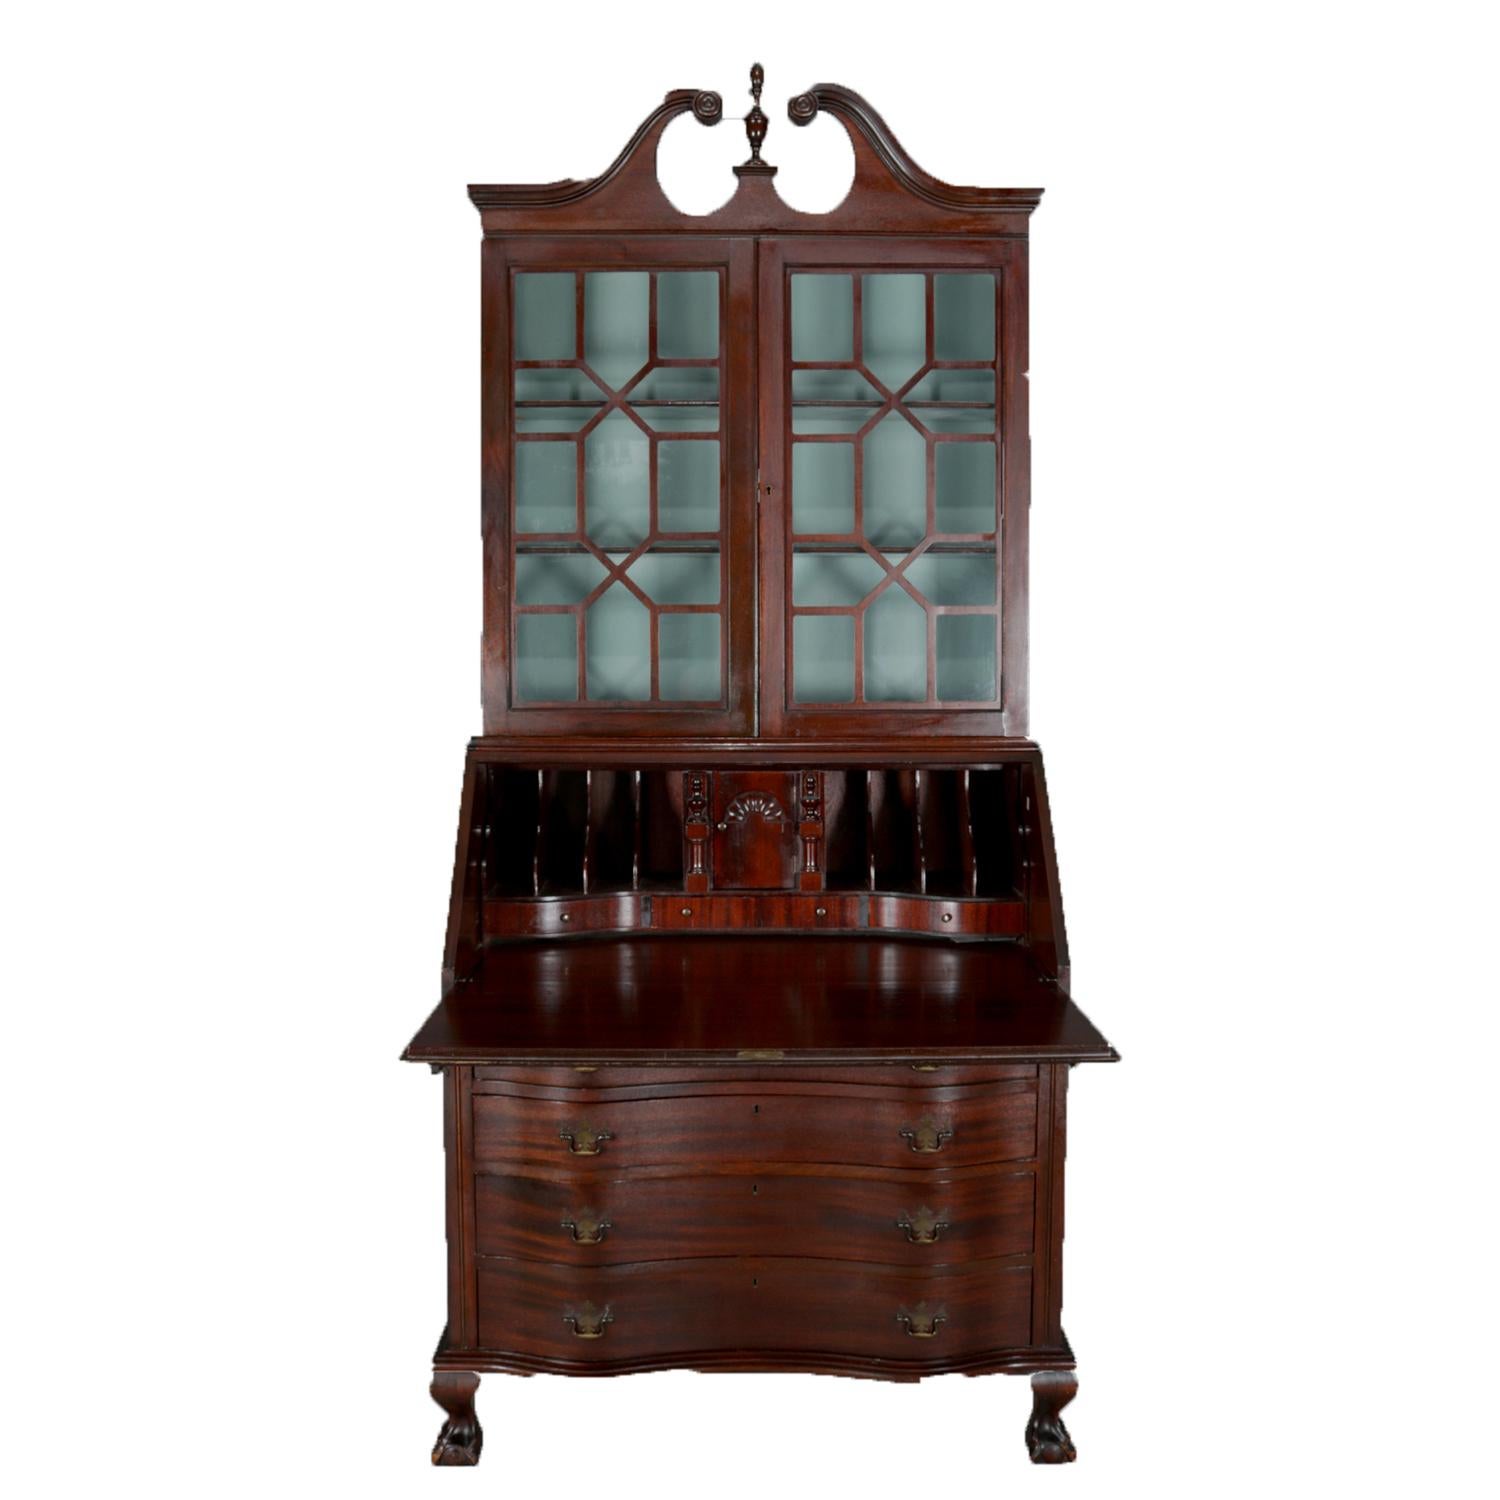 Governor Winthrop secretary features mahogany construction with broken arch pediment over two glass front doors opening to bookshelf with painted interior seated on slant drop front desk opening to reveal writing surface with storage drawers and